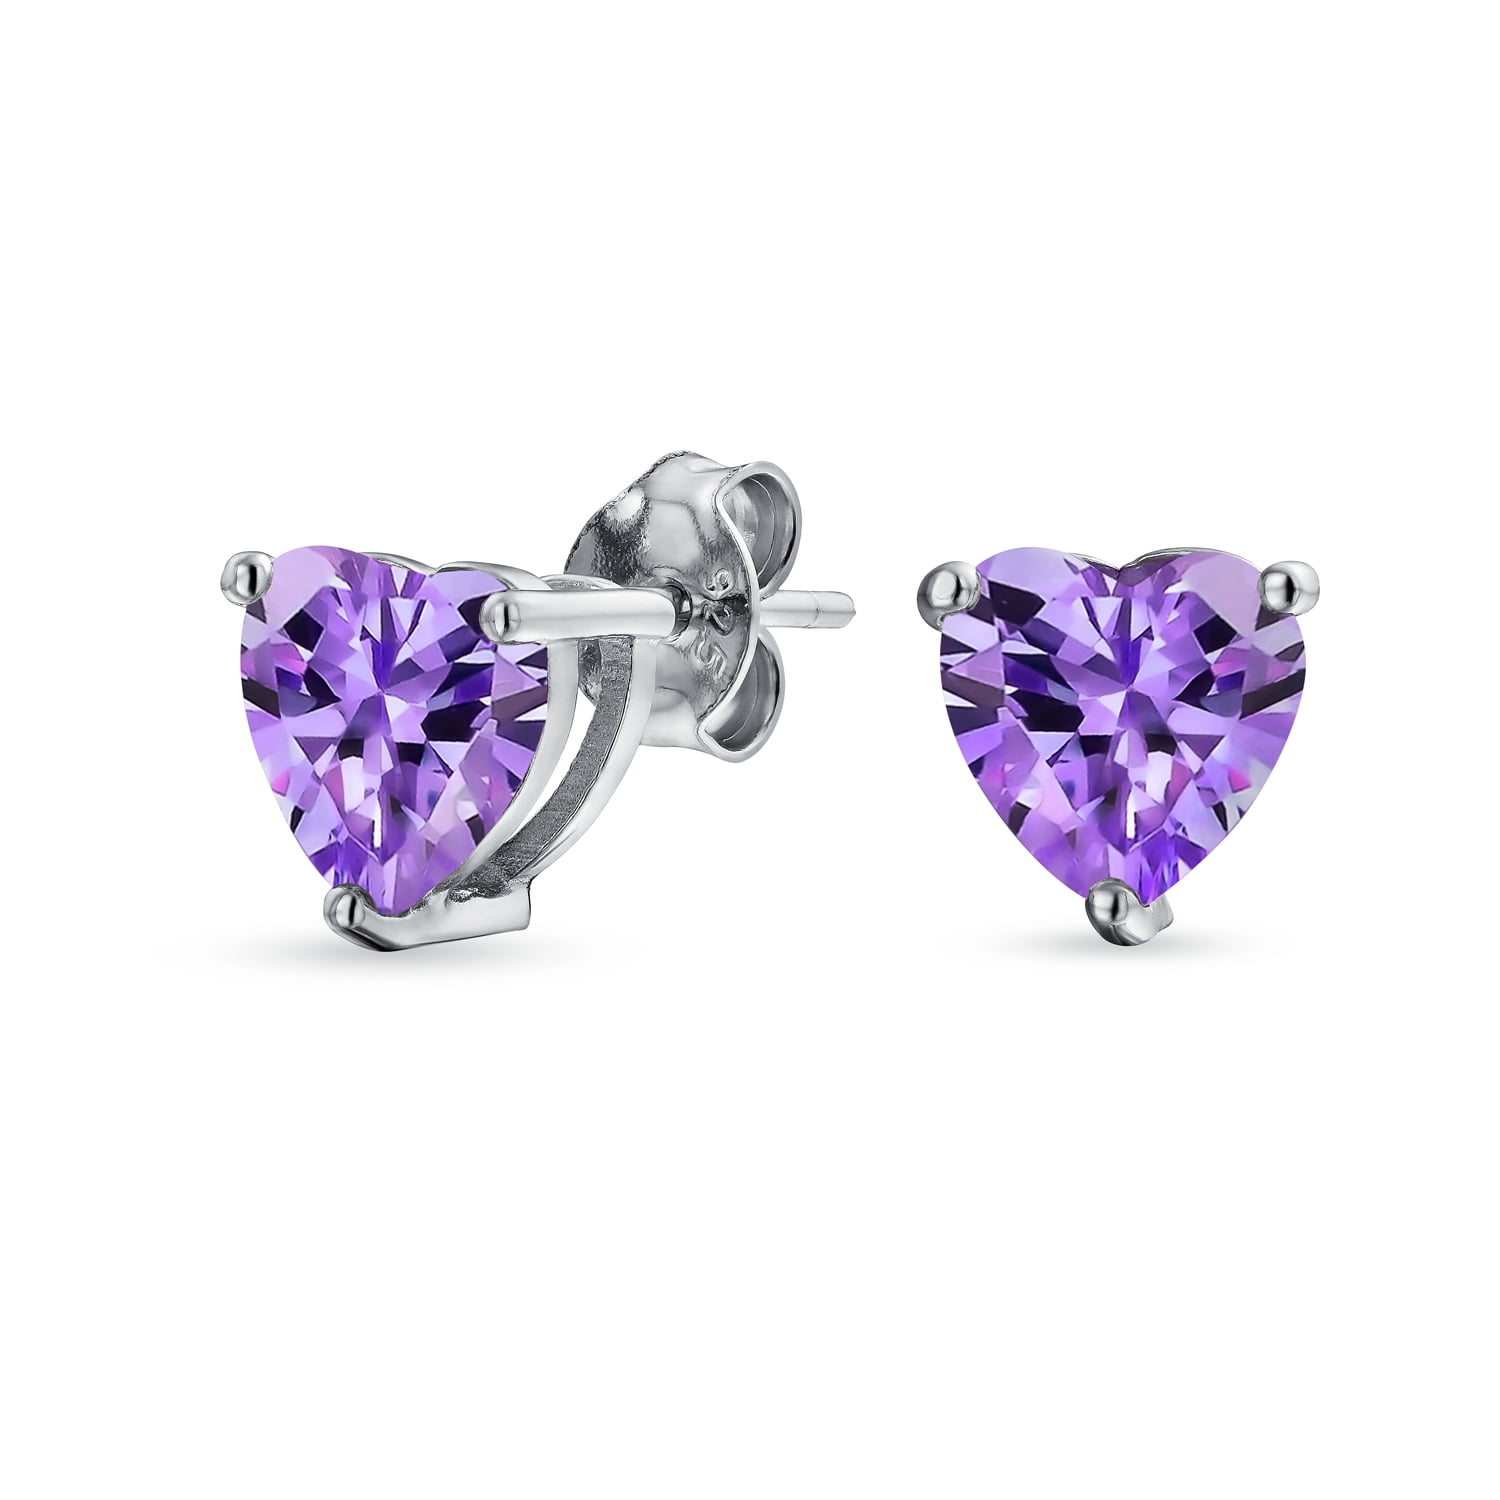 Details about   Simulated Amethyst & White Topaz CZ anniversary Band Ring In Sterling Silver 